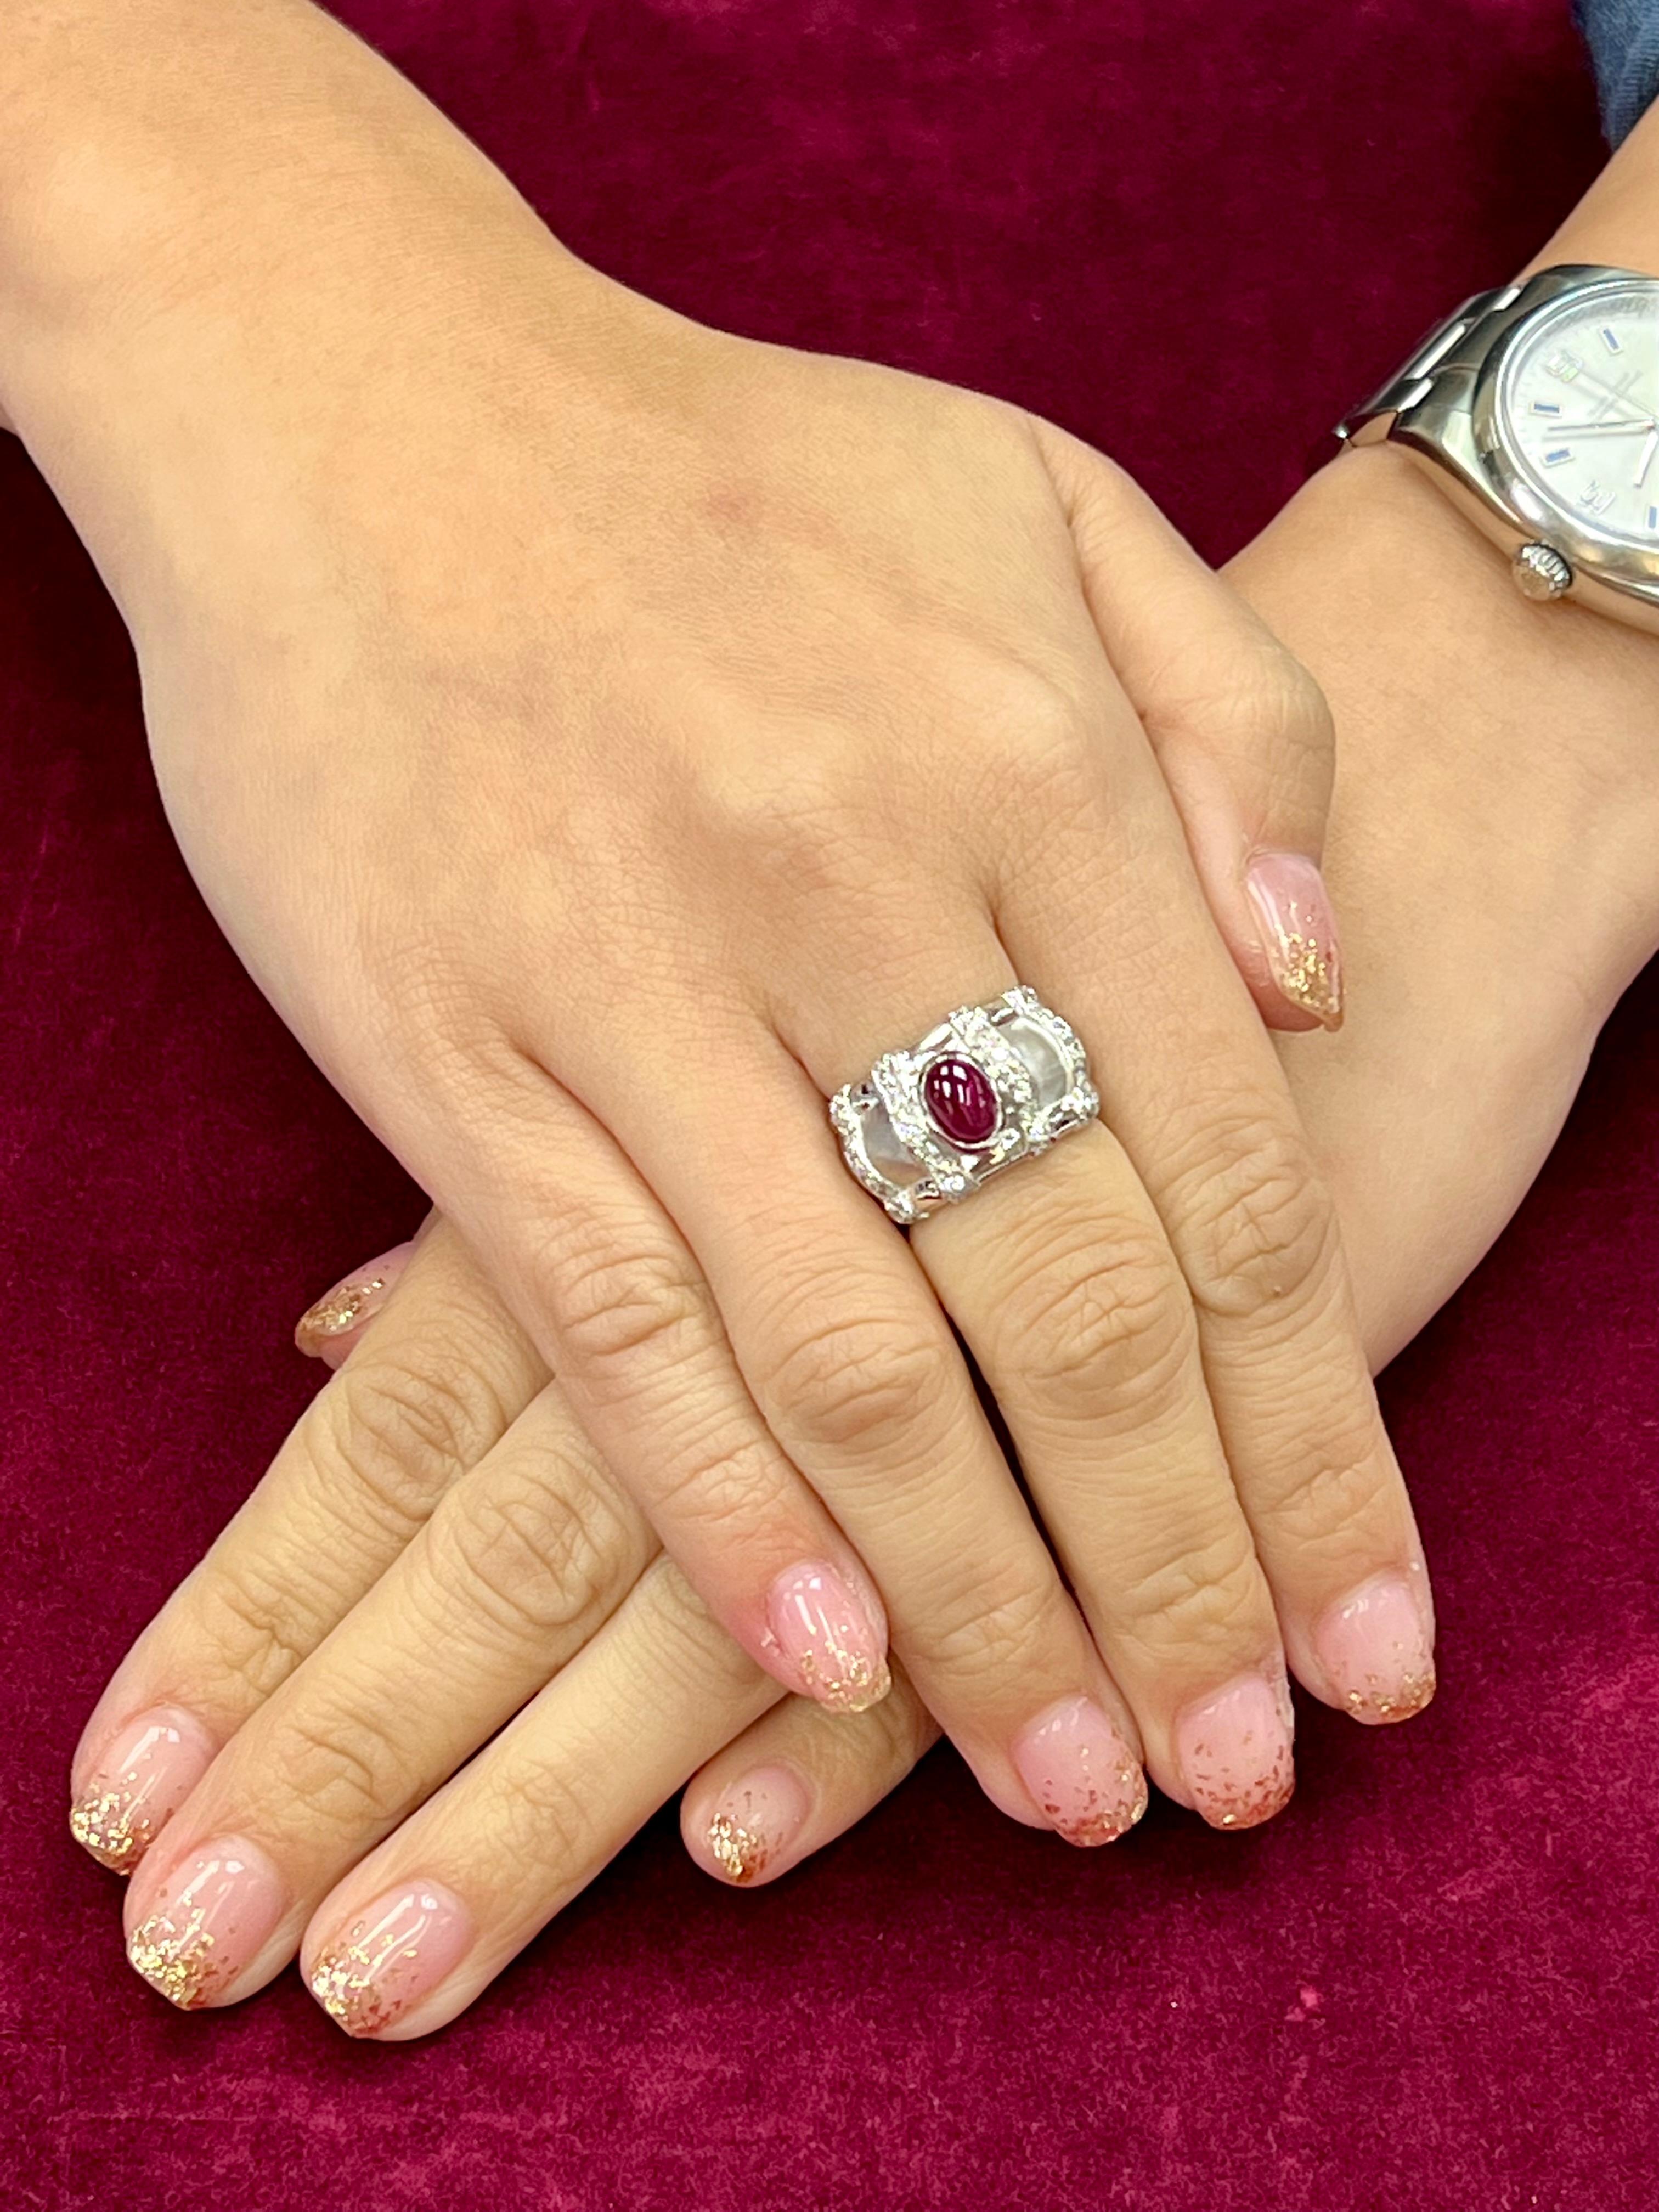 Please check out the HD video! This is a nice piece! Here is a nice Burma Ruby and diamond ring. The ring is set in 18k white gold with white diamonds. The center Burma ruby cabochon is 1.93cts. There are also 34 small white diamonds totaling